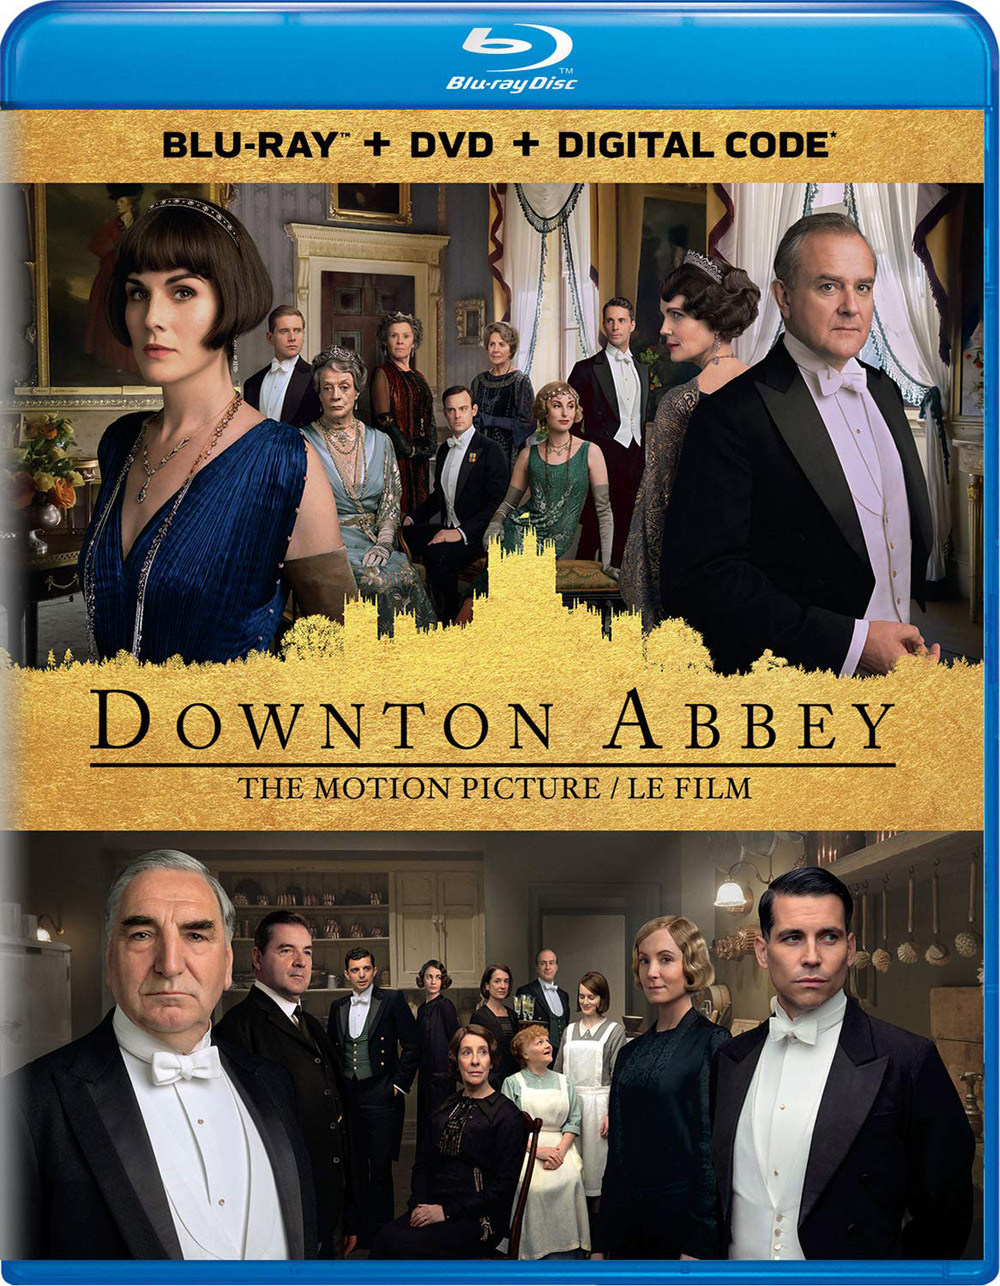 Downton Abbey available on Blu-ray and DVD